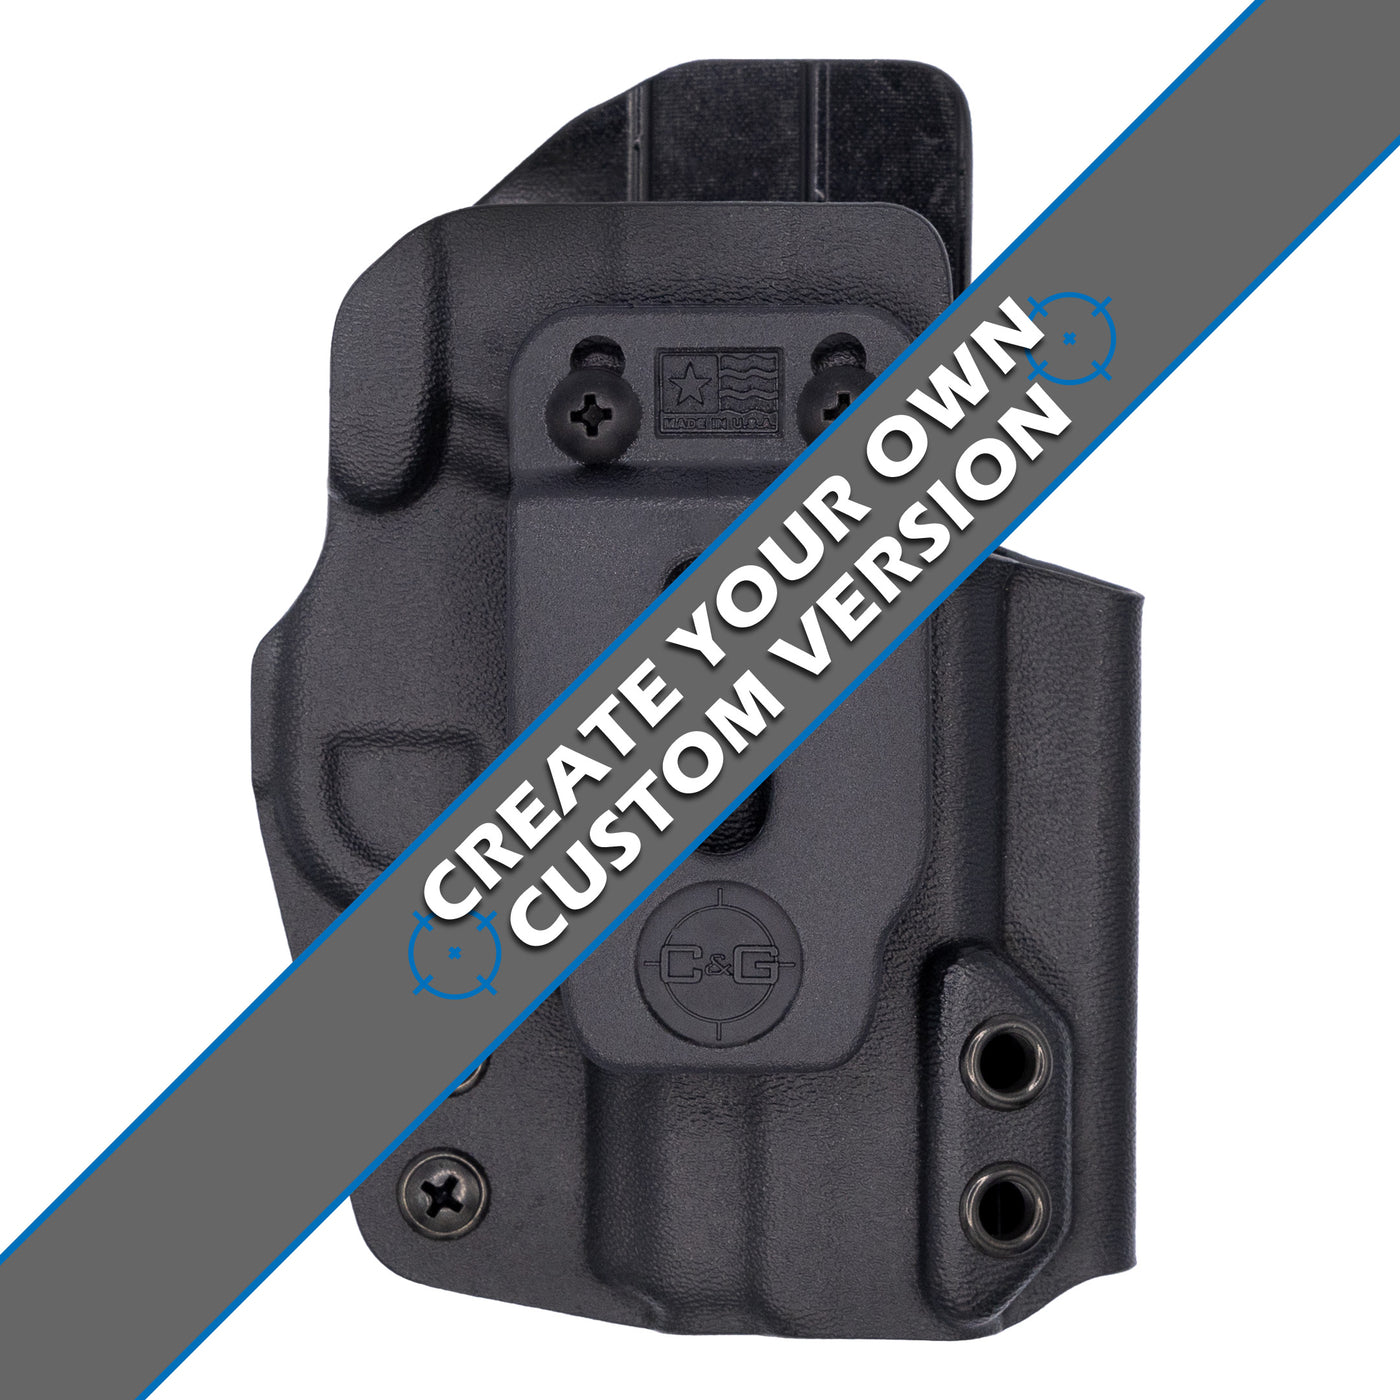 C&G Holsters custom Covert IWB kydex holster for Smith & Wesson M&P Shield 9/40 in black